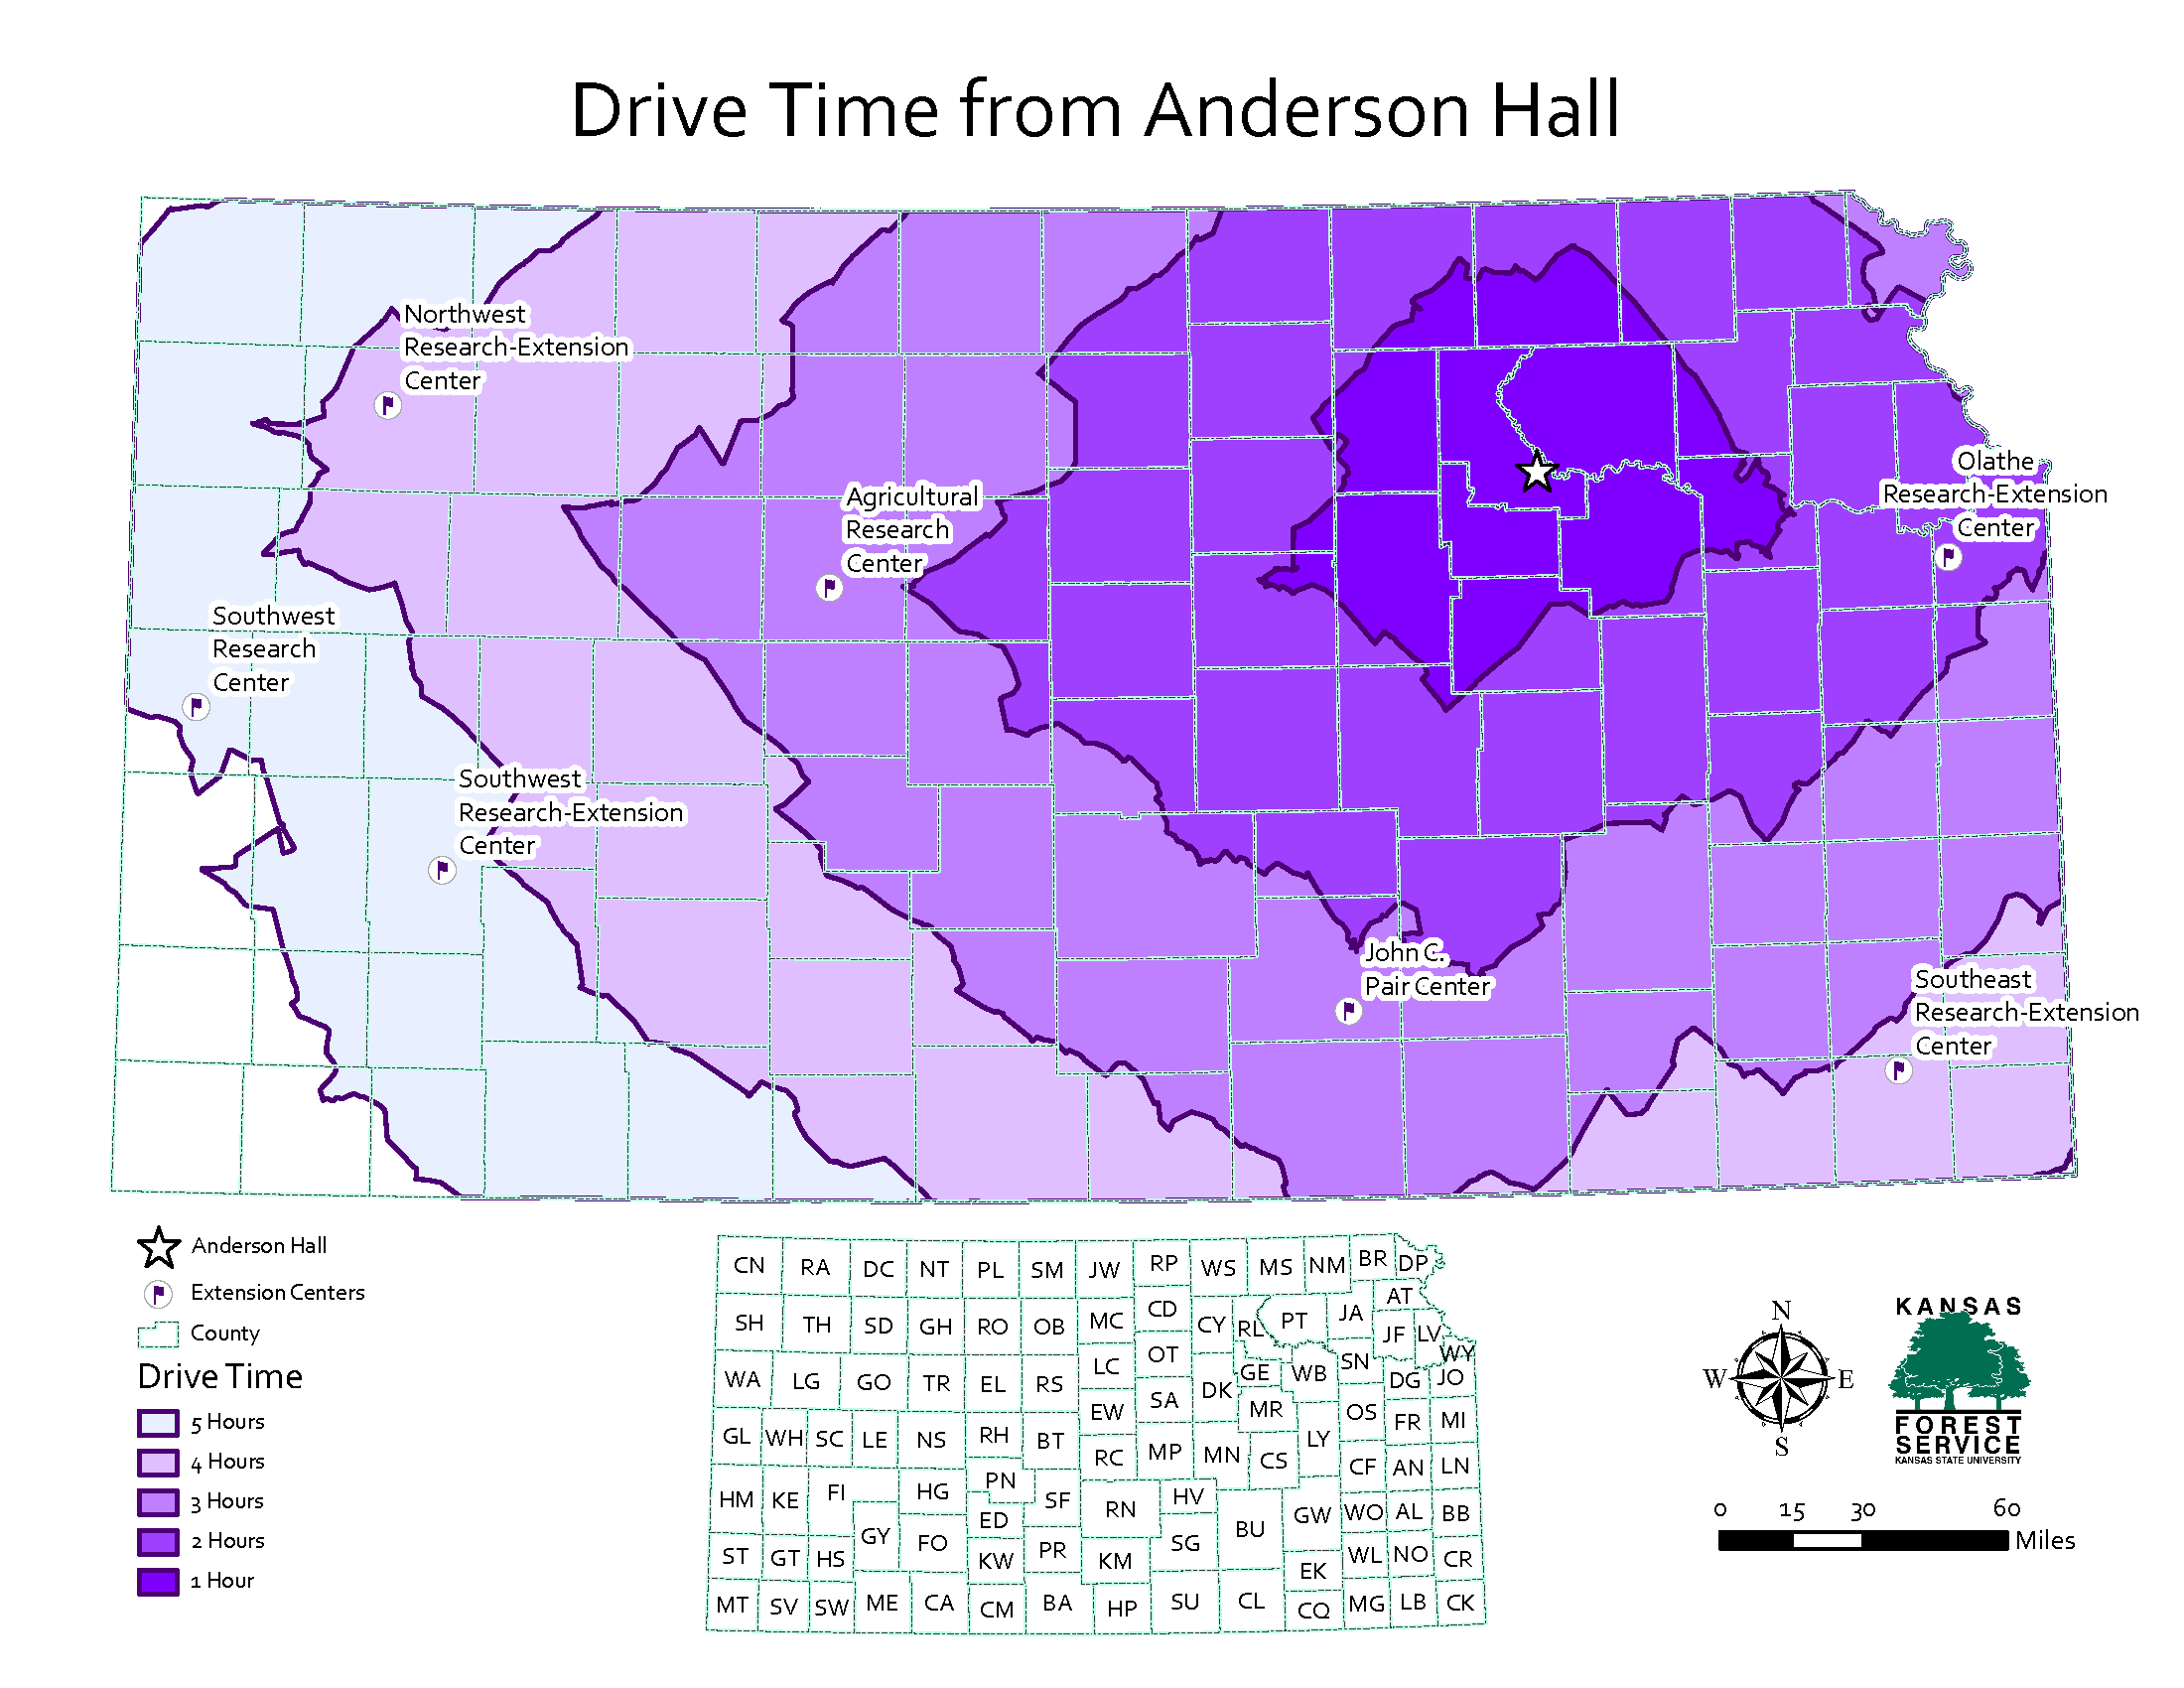 A heat map of Kansas and its counties, showing bands of purple (from dark in the center to very light lavender at the edges) indicating the drive time from Anderson Hall to other parts of the state.